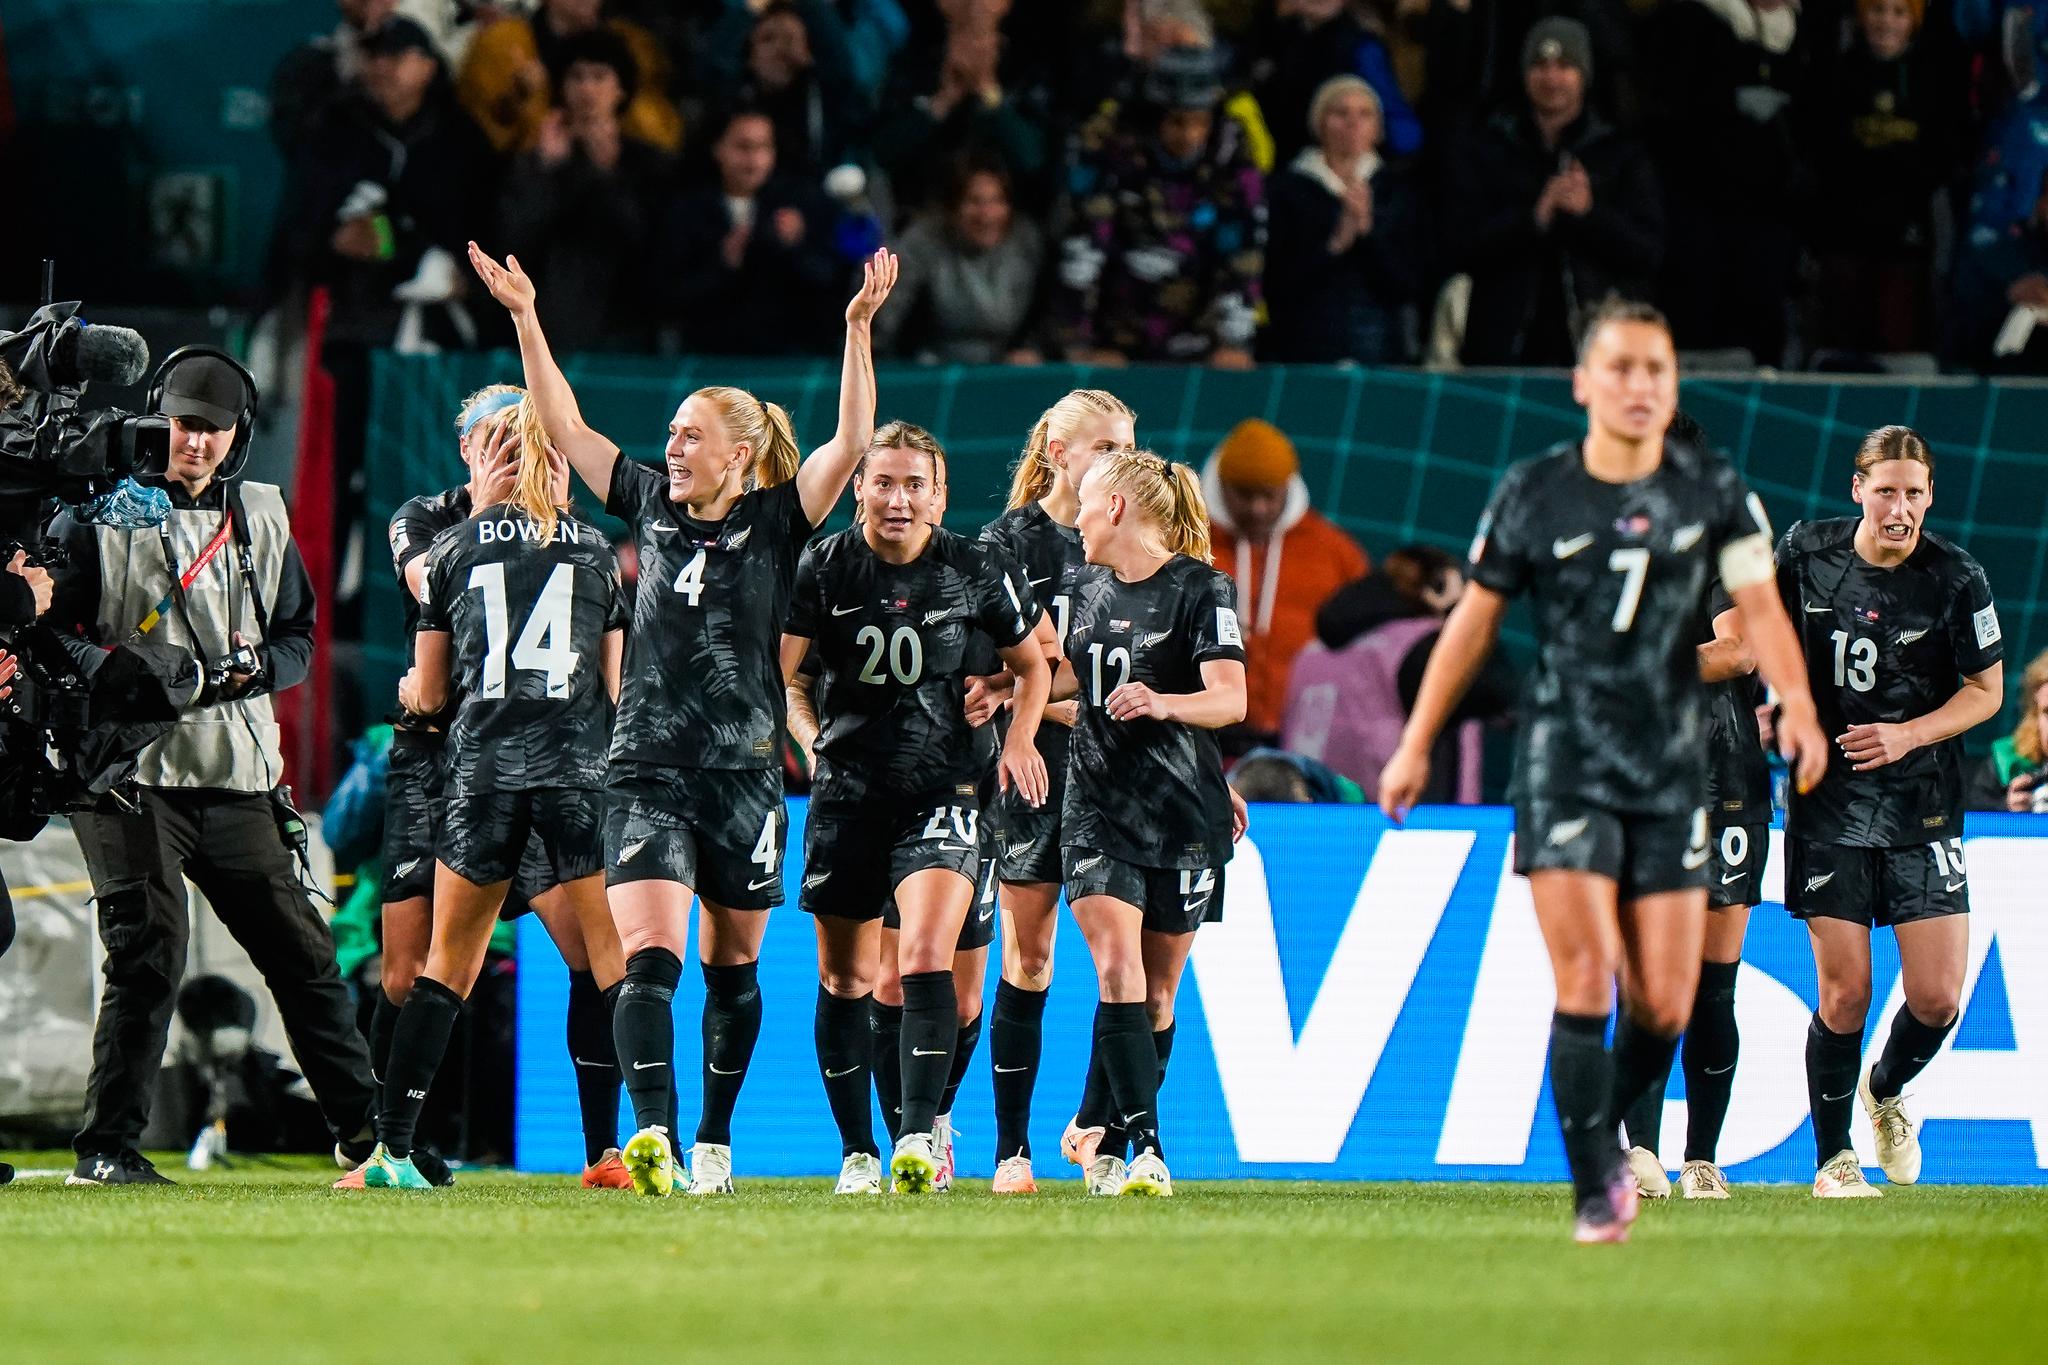 Security is tight around New Zealand’s World Cup team following the arson